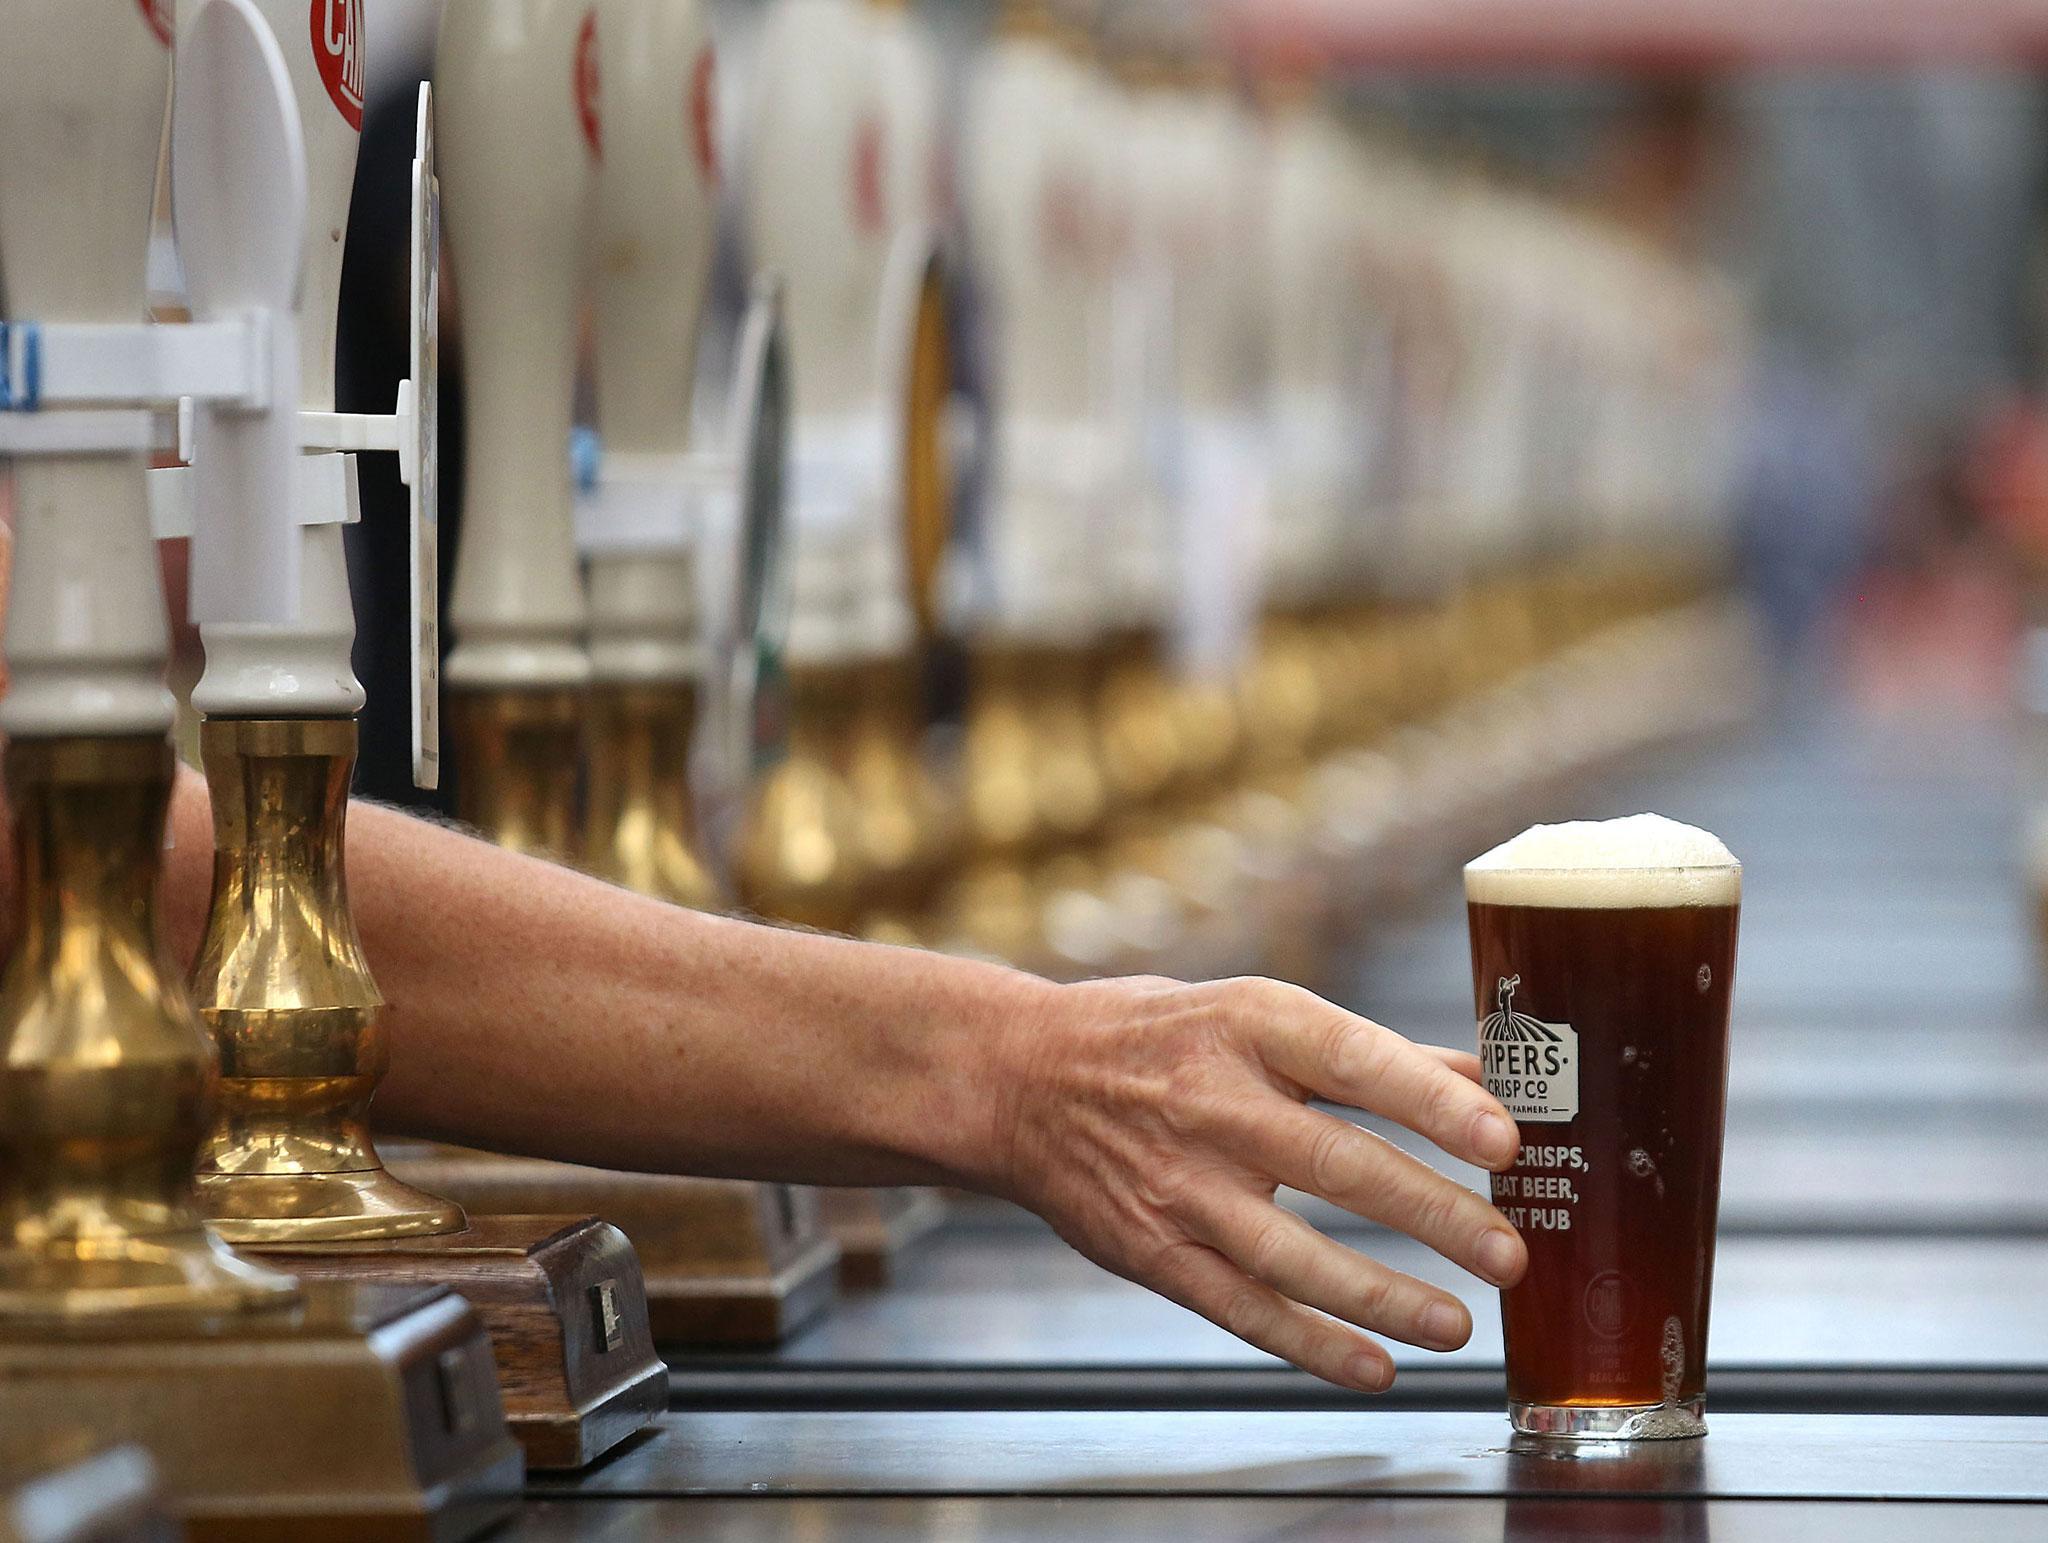 There hasn’t been so many breweries in the UK since the 1930s